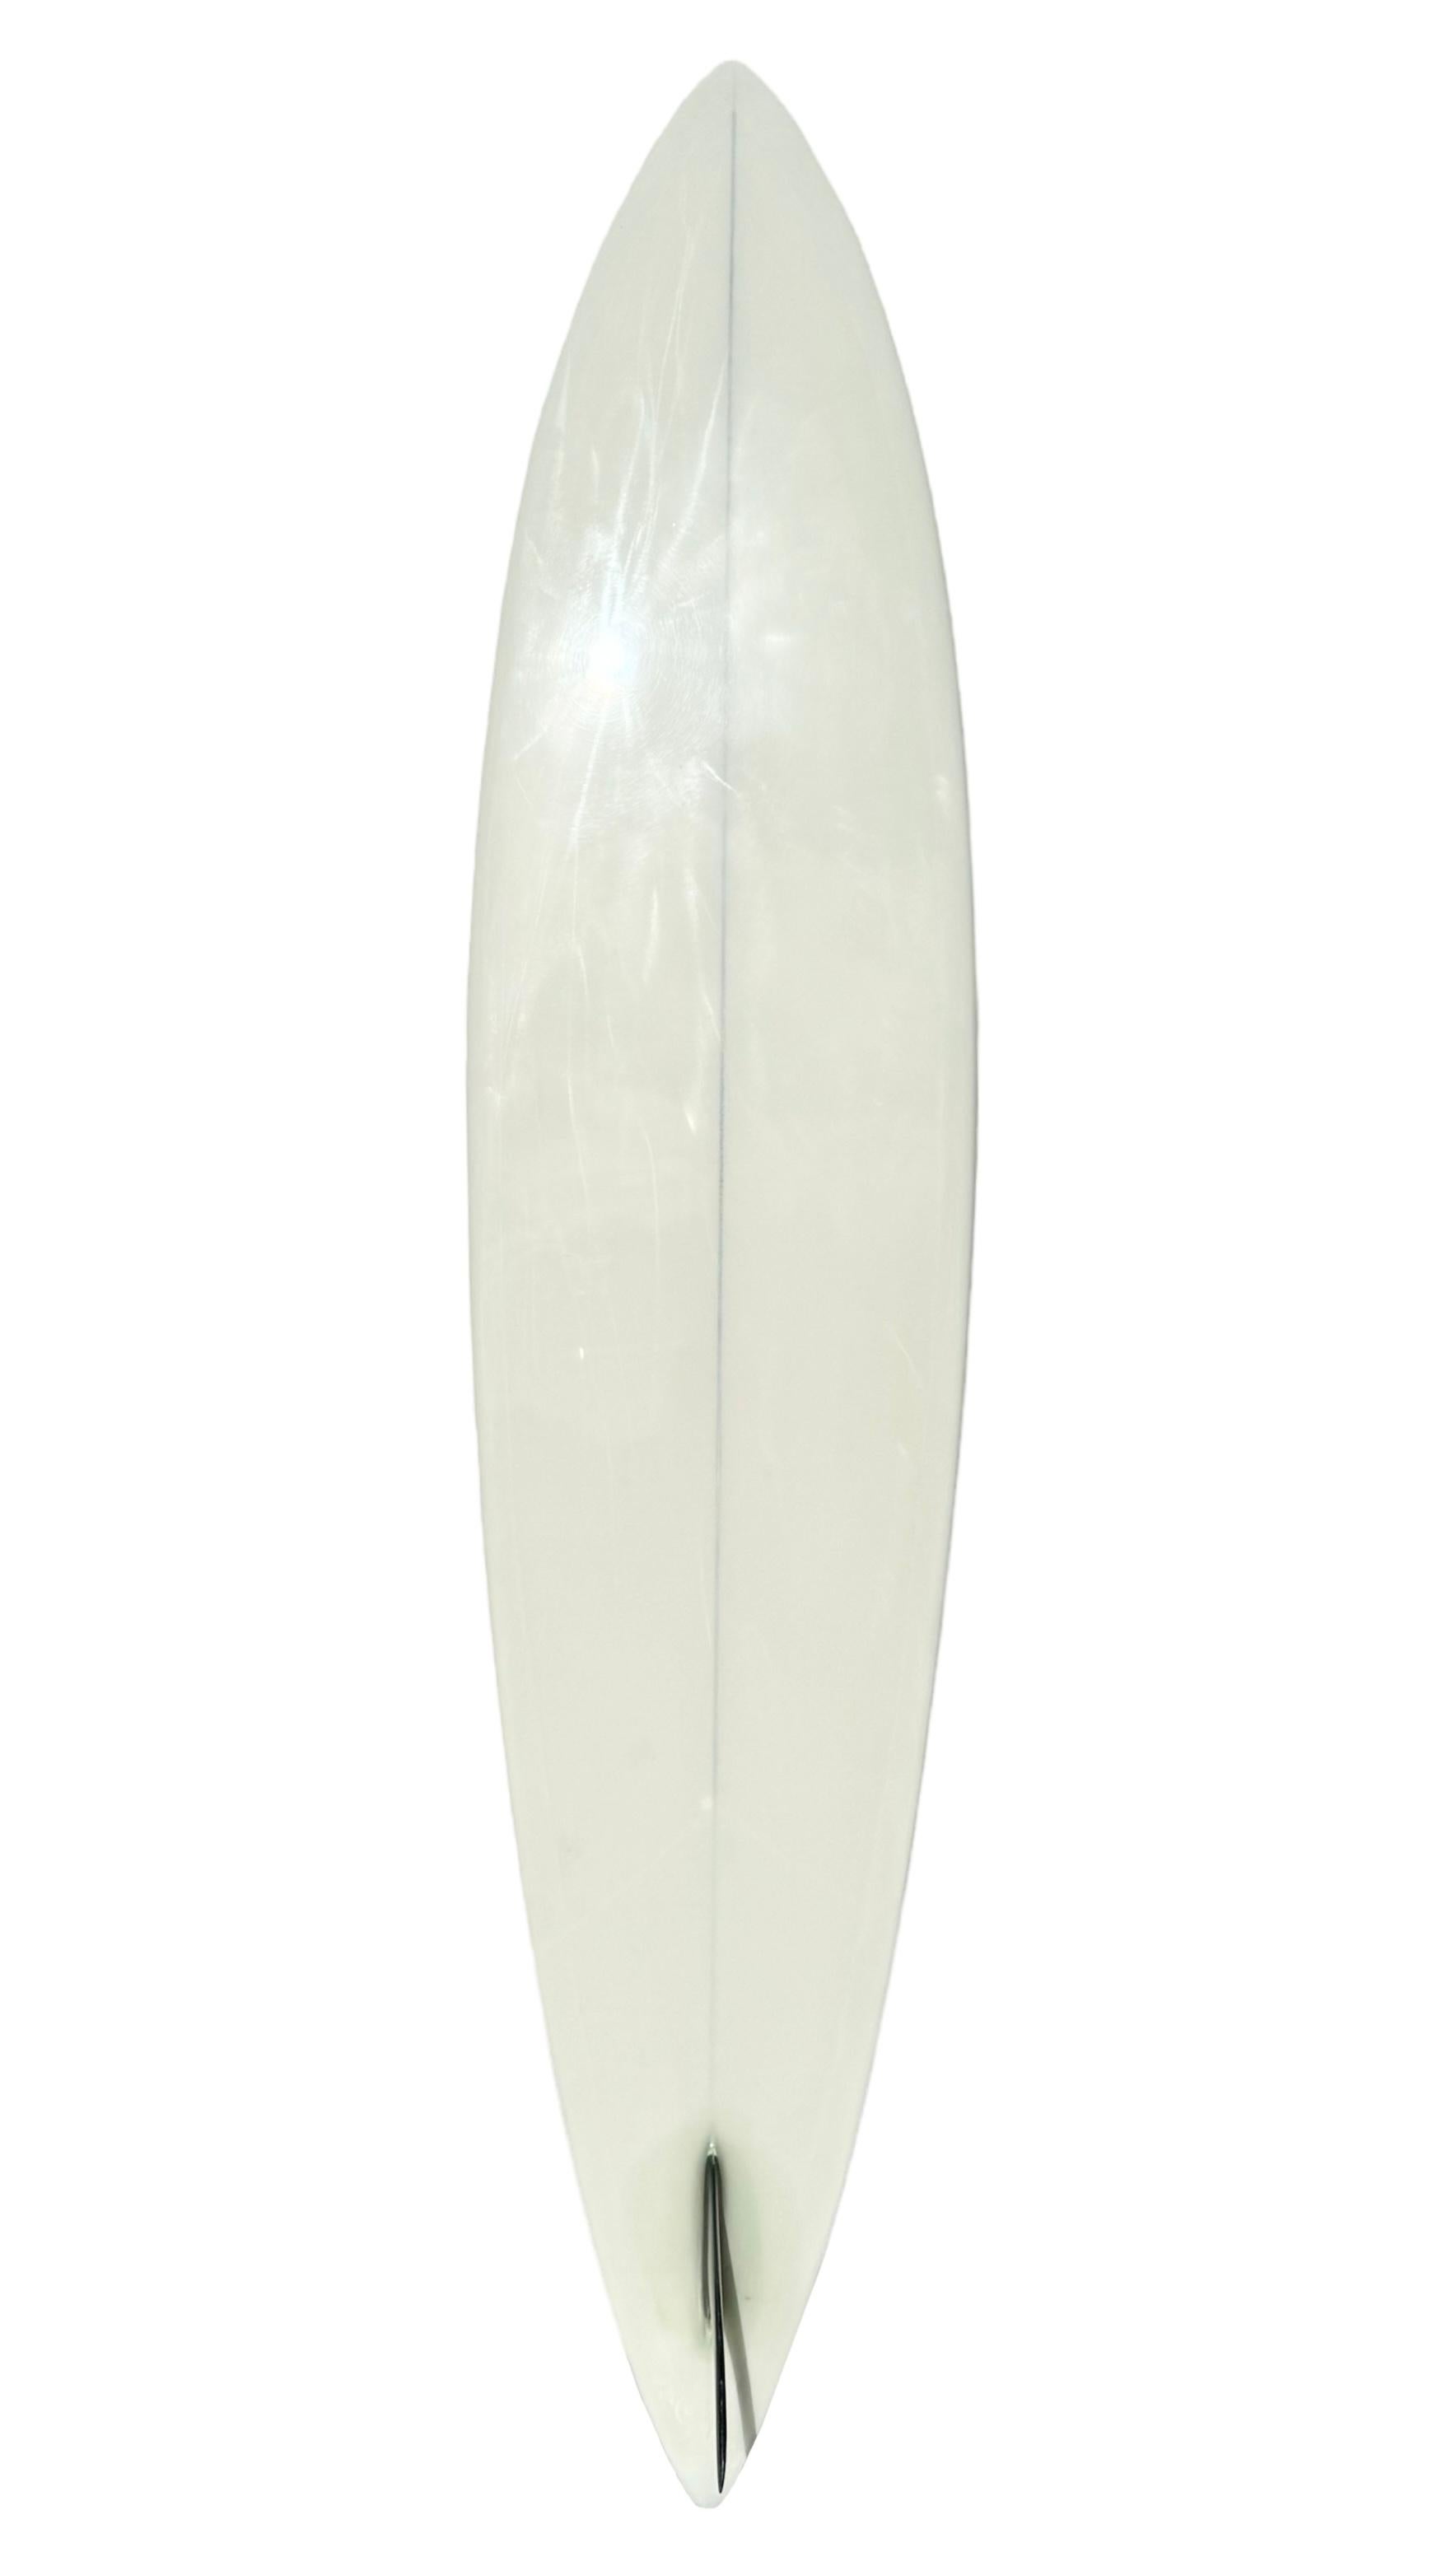 1970s vintage Mike Diffenderfer pintail surfboard. Features a beautiful ivory tint with black pinstriping and matching glassed on fin. A remarkable example of an early 1970s surfboard shaped by the revered surfboard design pioneer, Mike